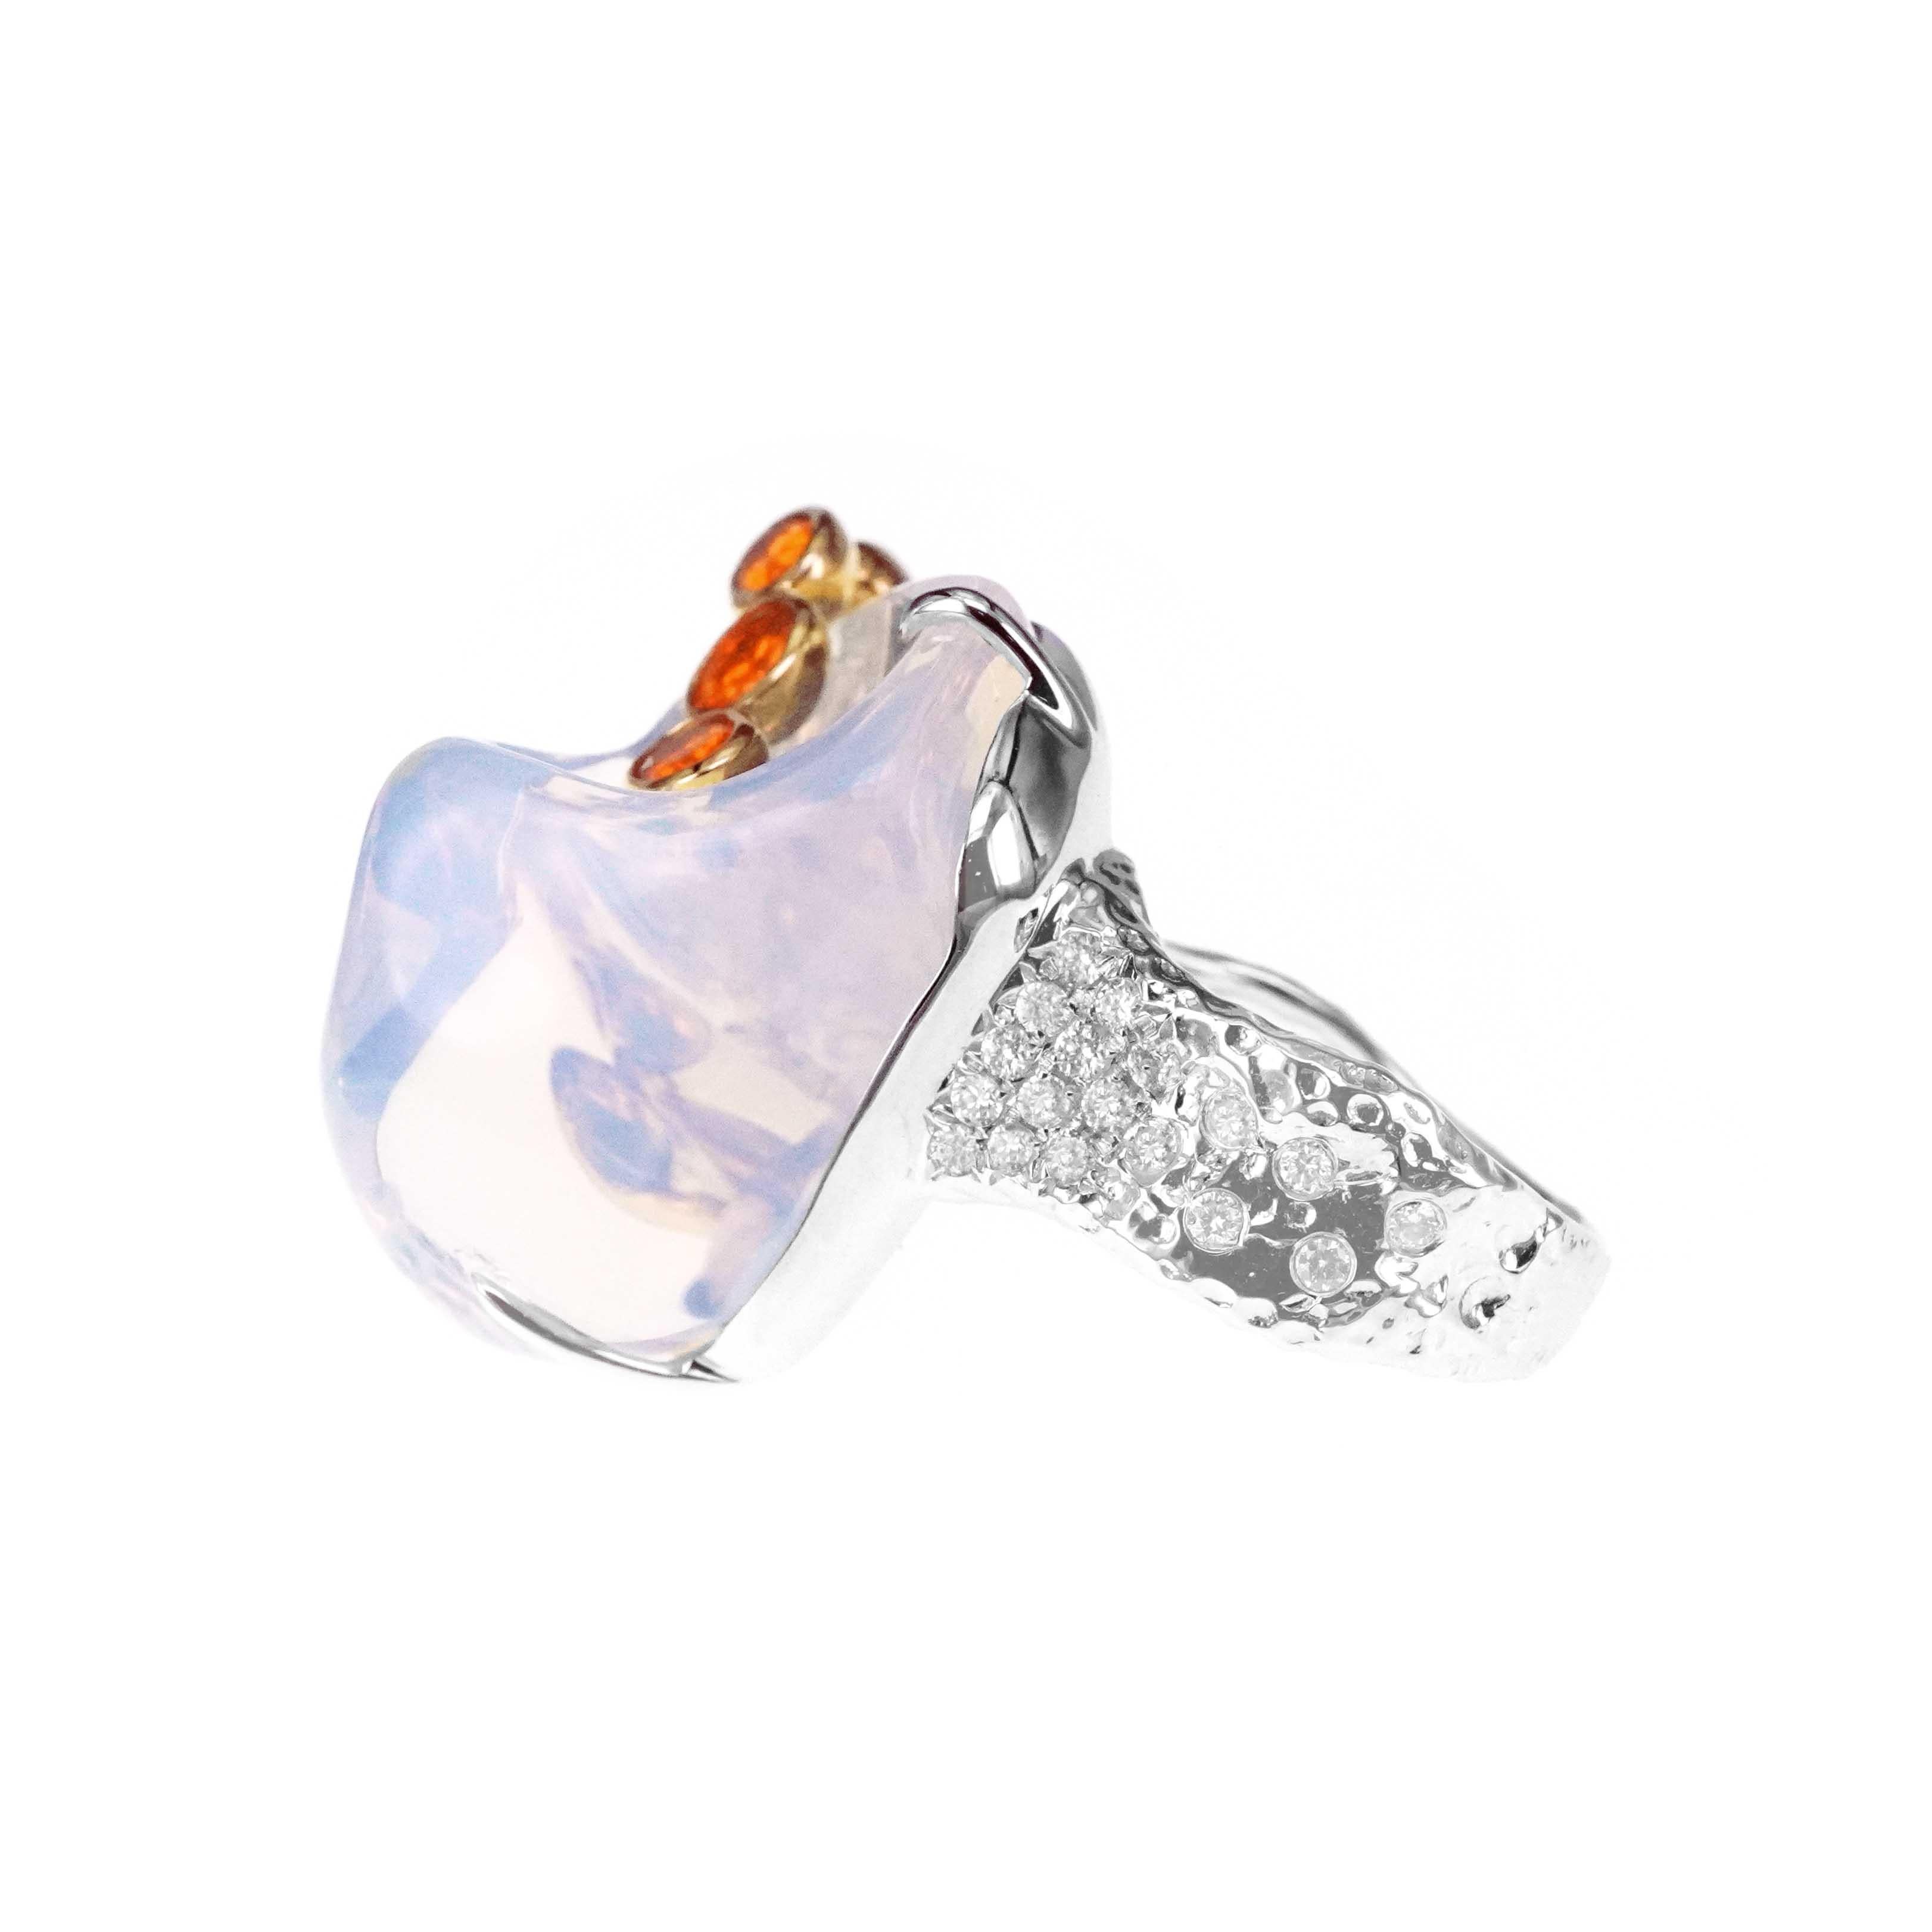 Sugarloaf Cabochon 40.44 Carat Mexican Opal Gigantic One of a Kind Ring For Sale